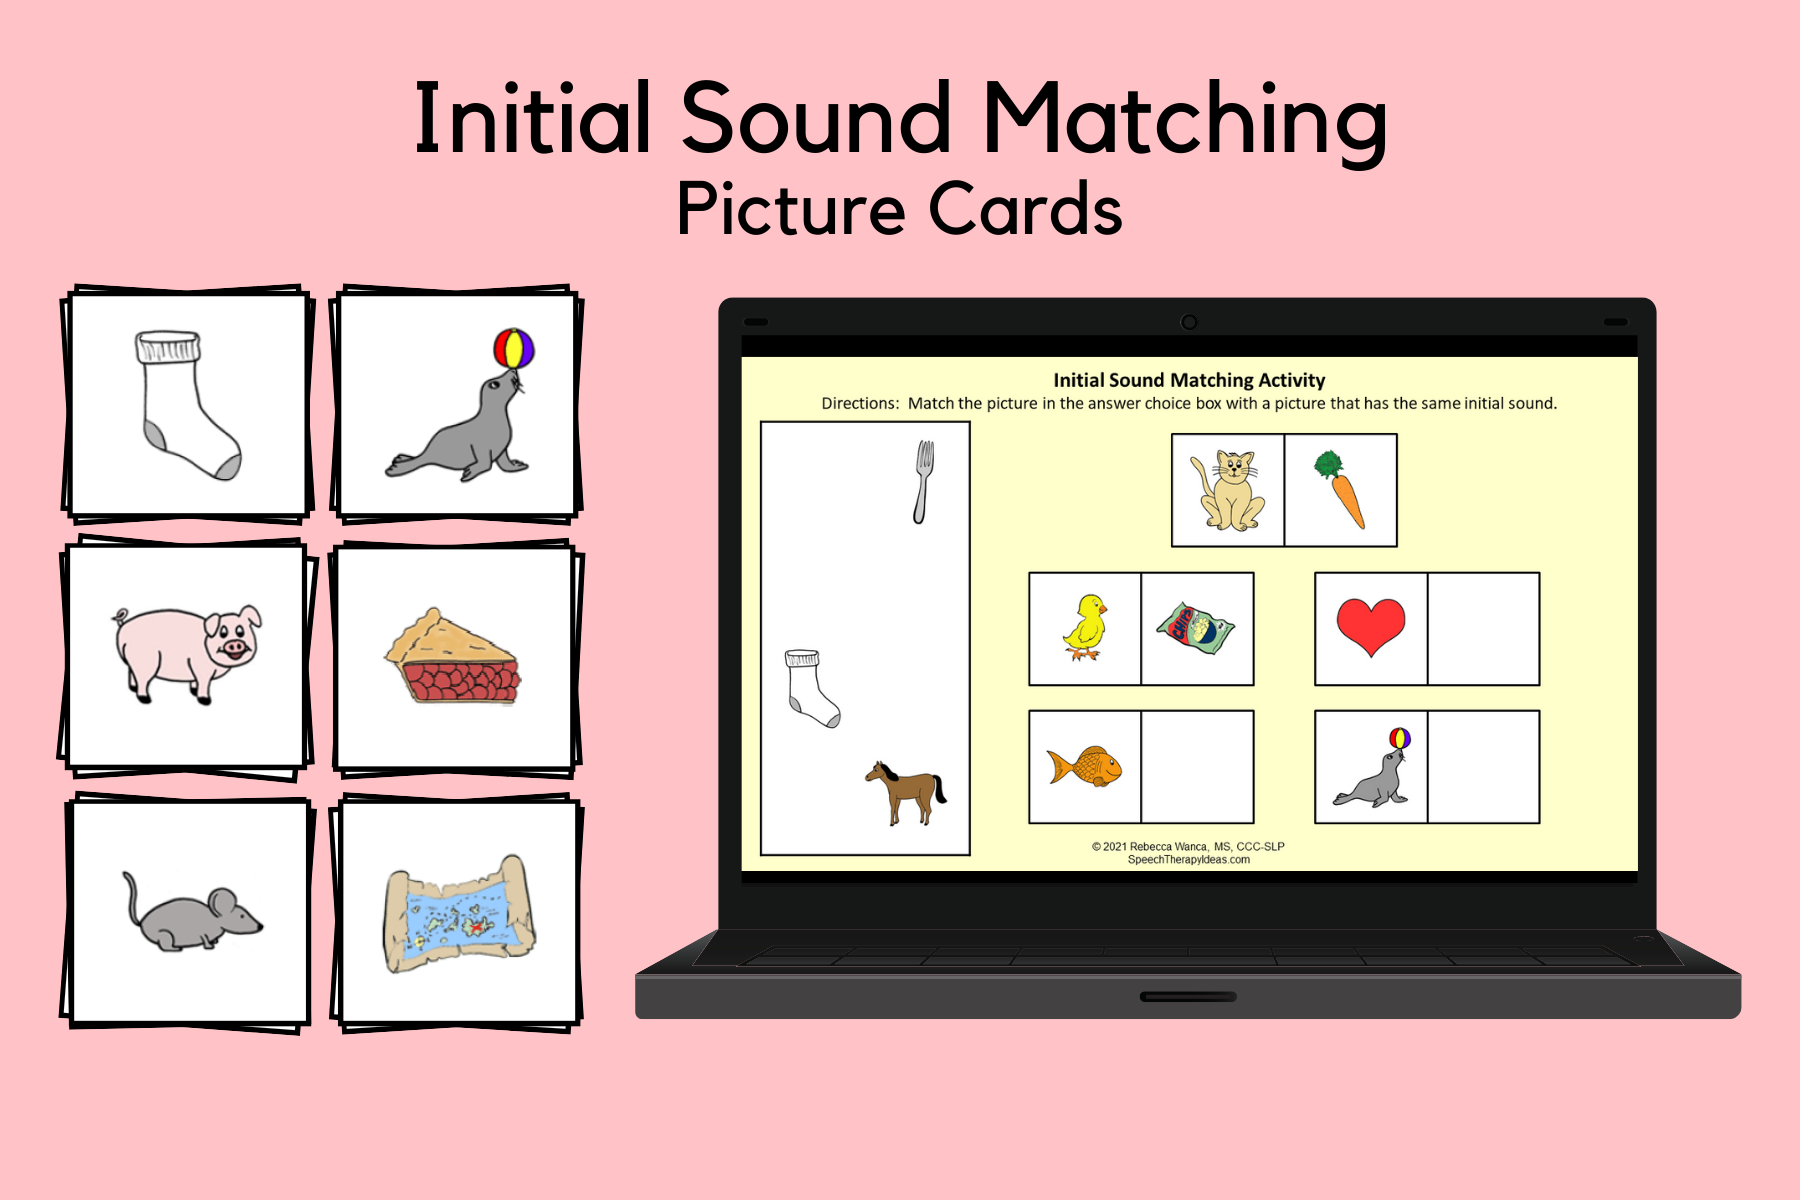 Initial Sound Matching Picture Cards